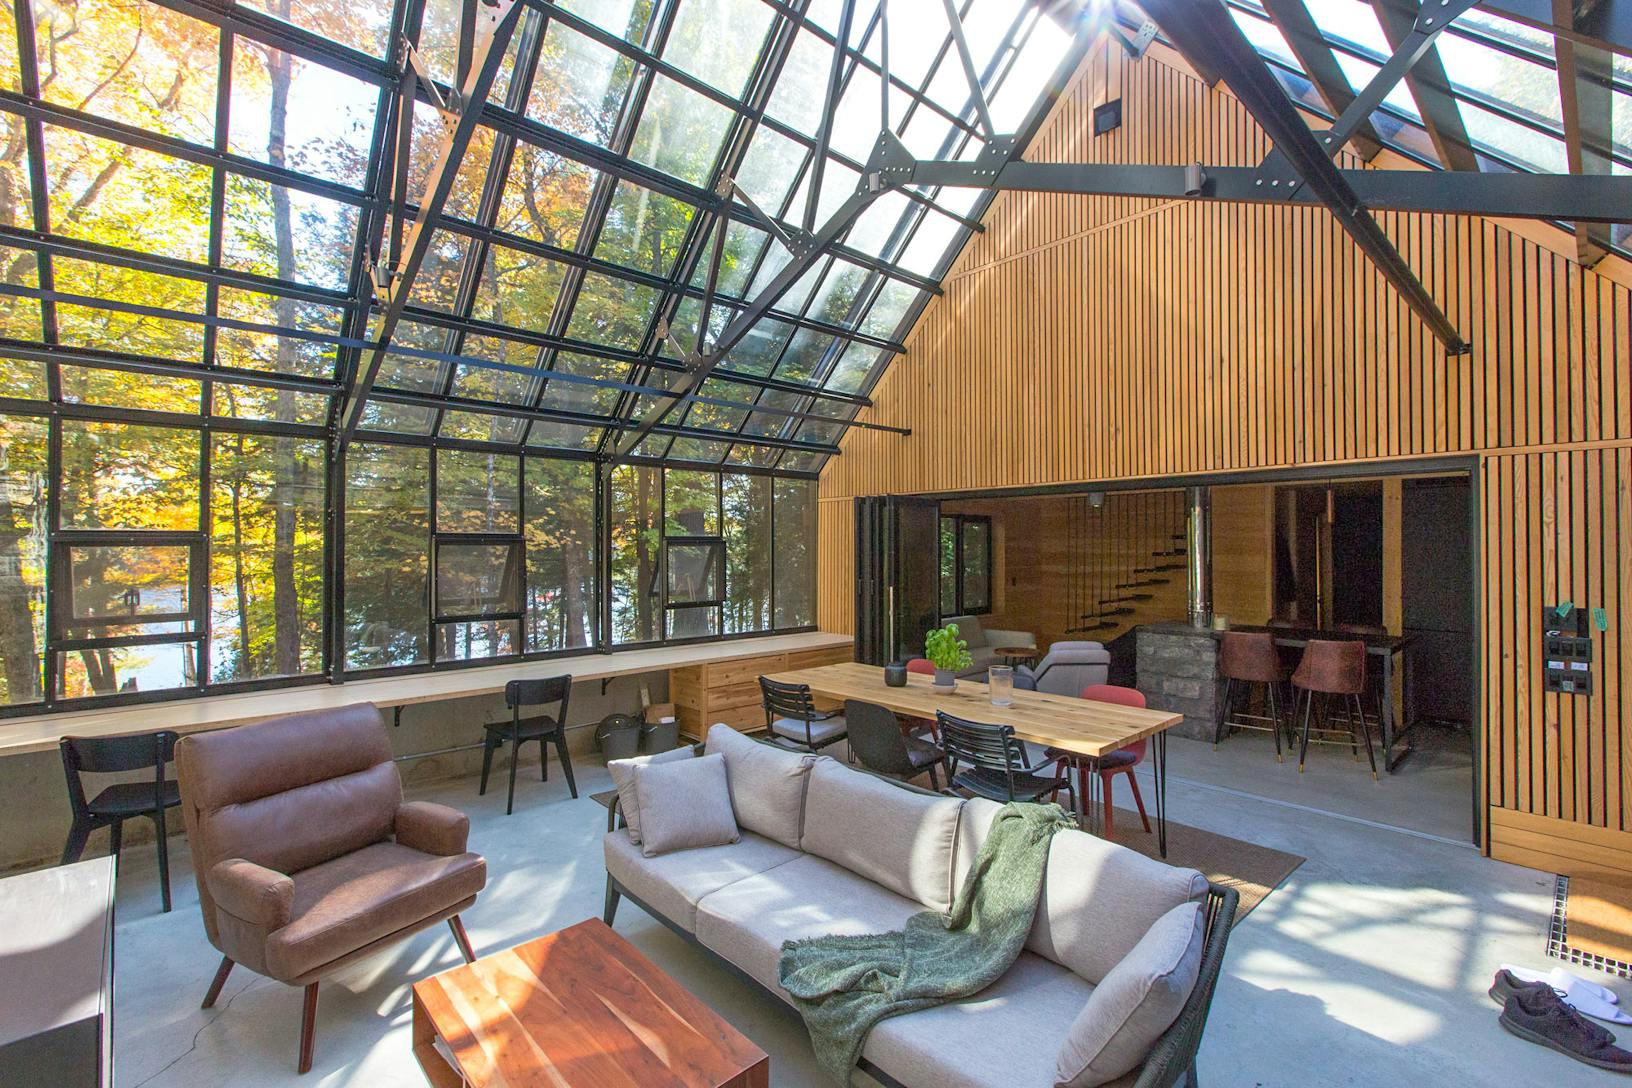 A stunning wintergarden featuring glass walls and a glass roof